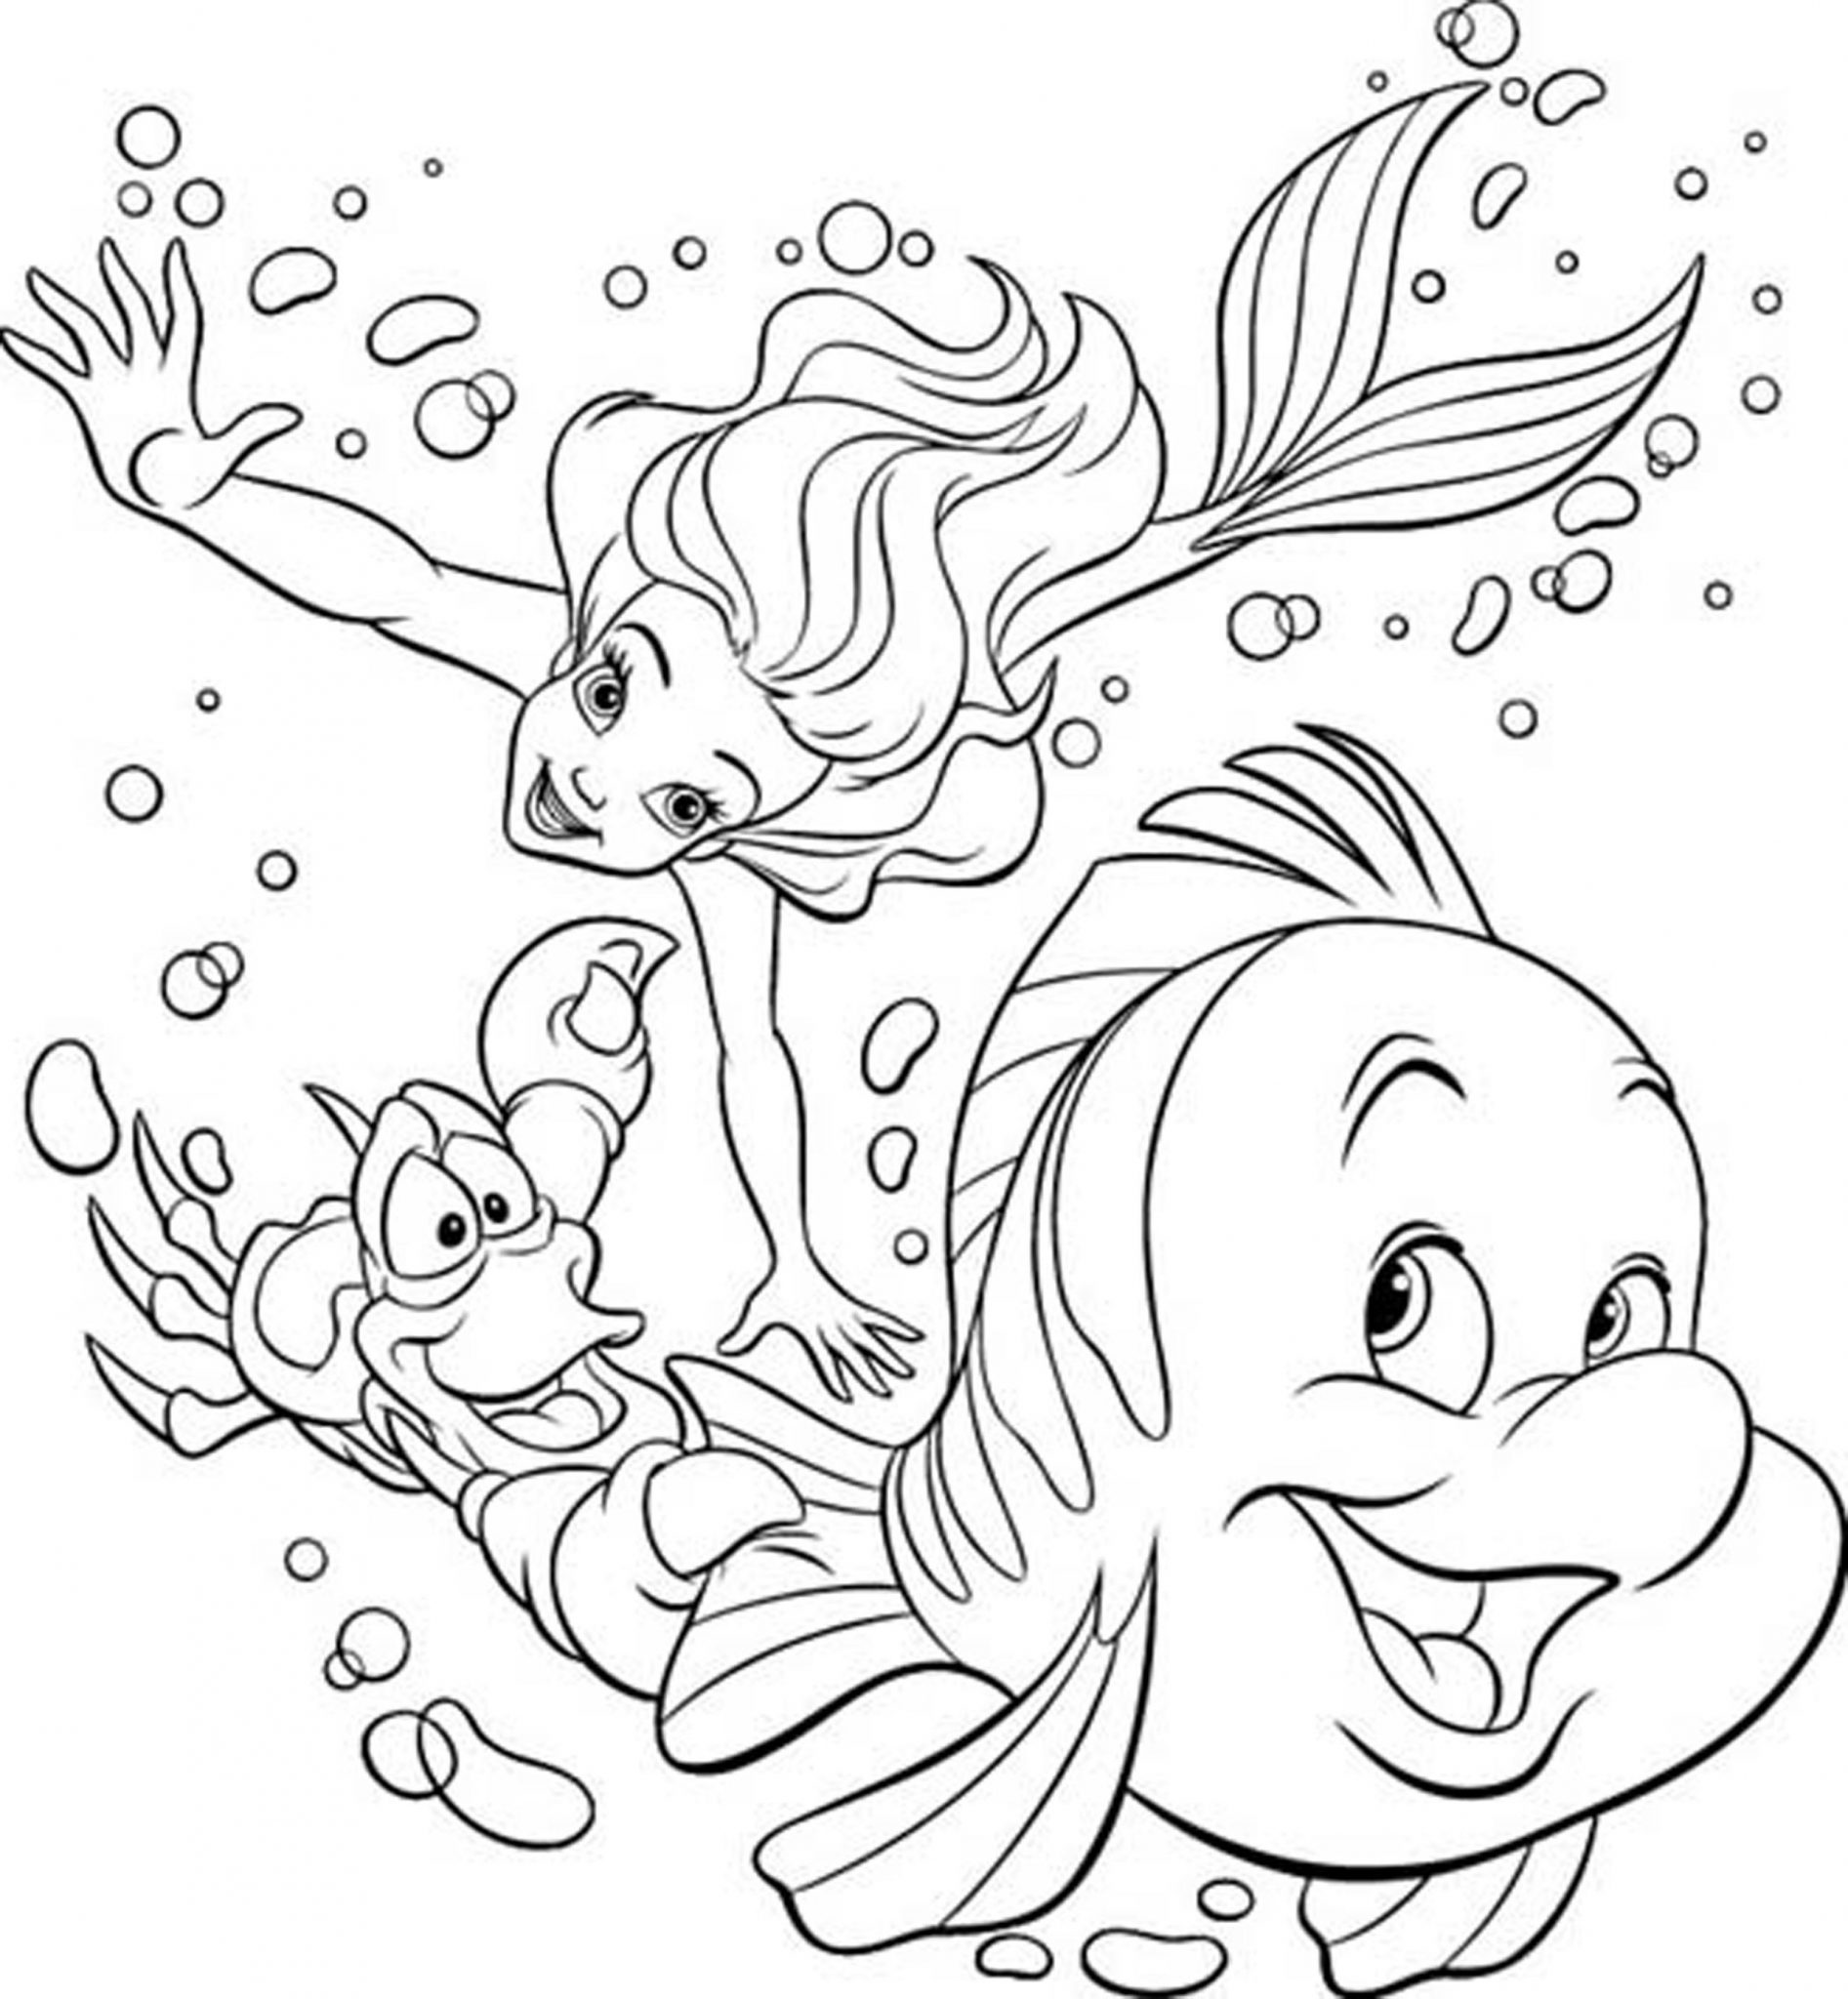 disney-coloring-pages-pdf-coloring-home-disney-coloring-pages-to-download-and-print-for-free